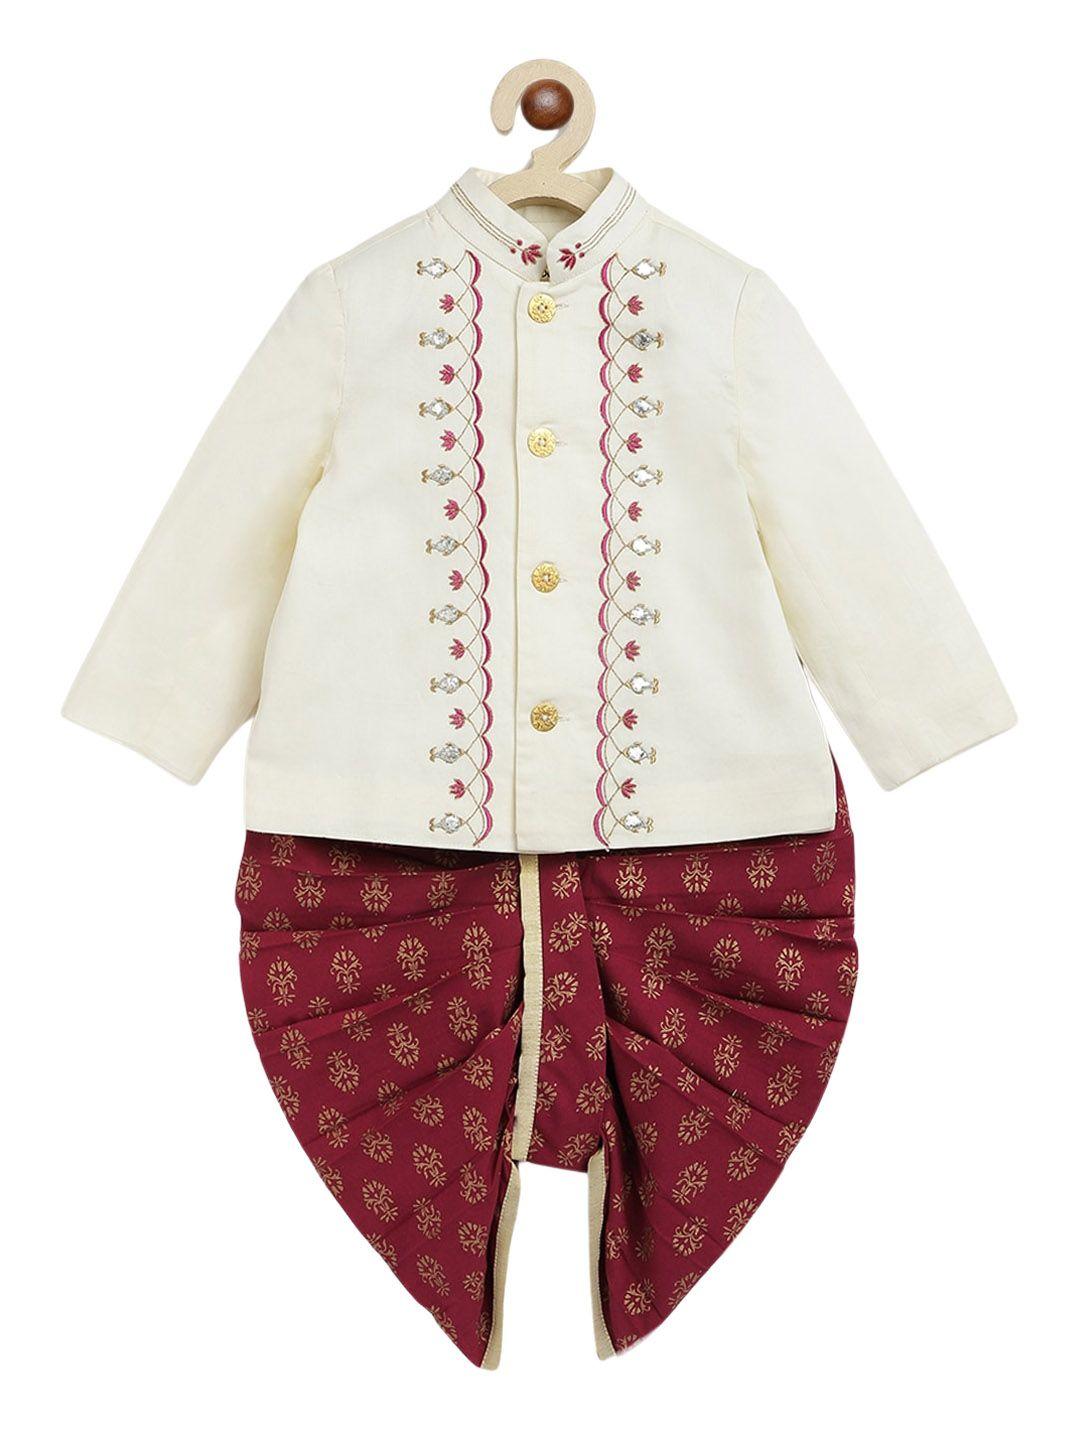 tiber taber infants floral embroidered pure cotton regular kurta with dhoti pants